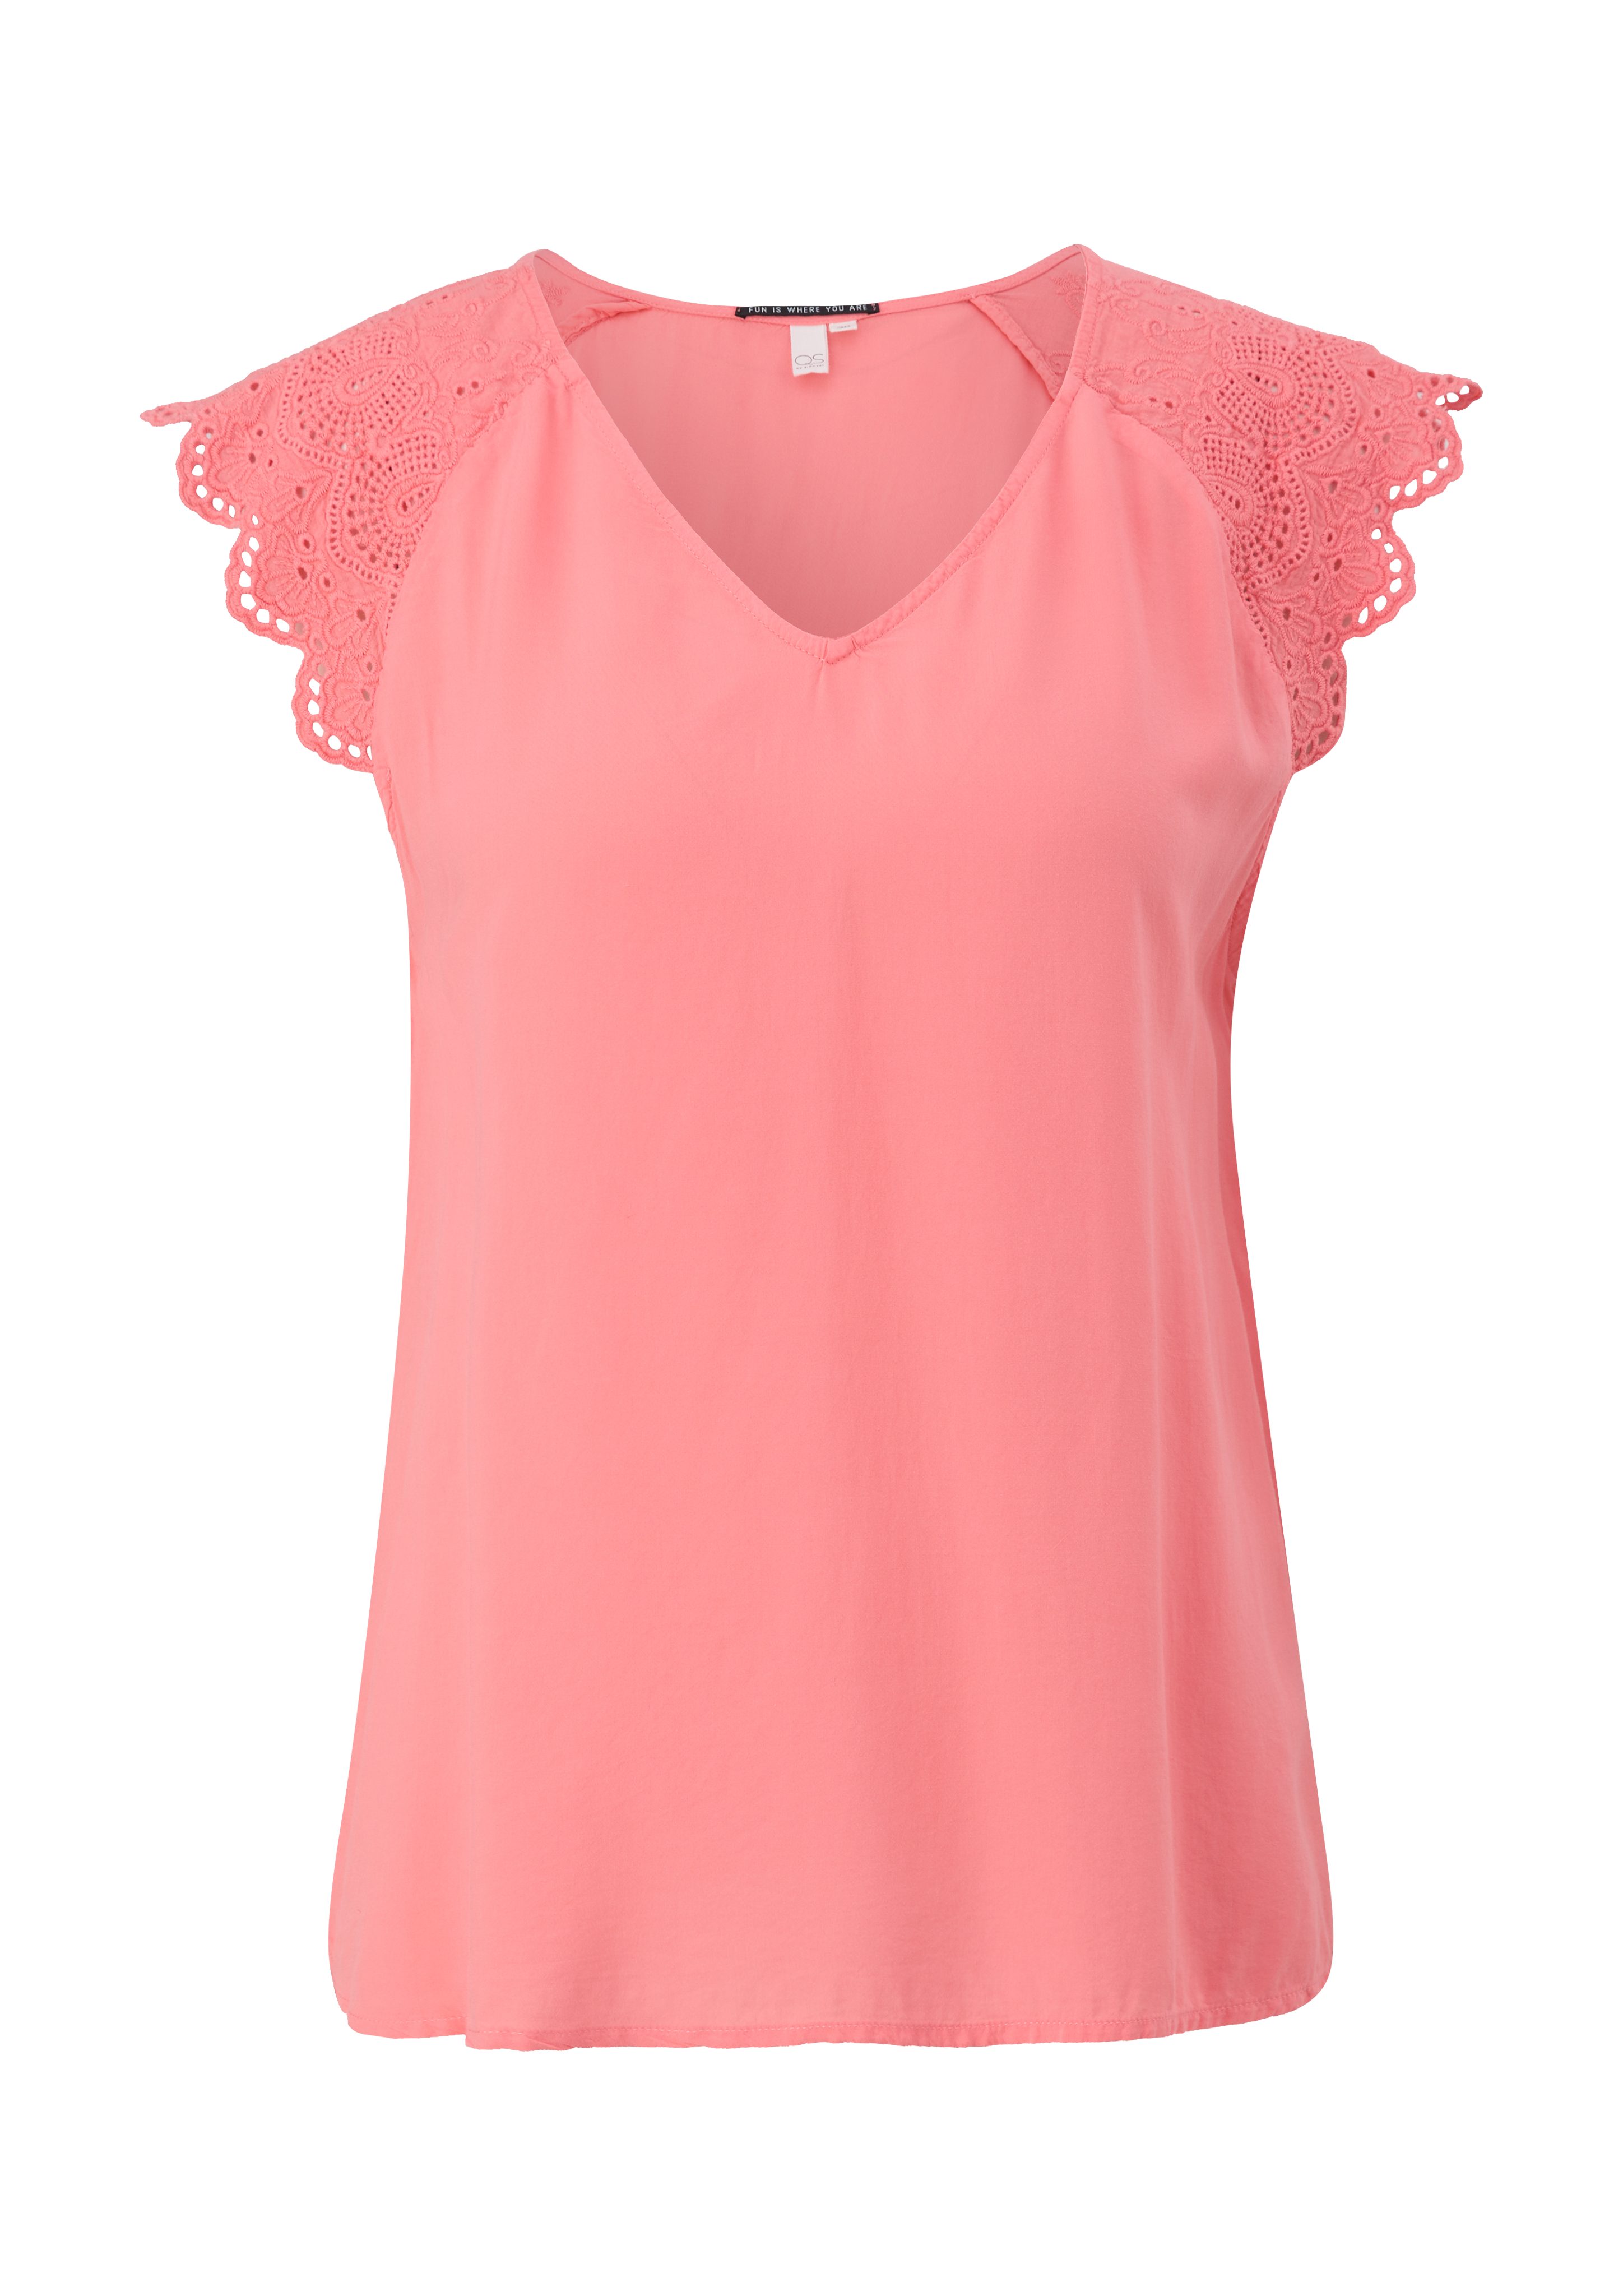 mit Broderie koralle Blusentop Bluse QS Anglaise